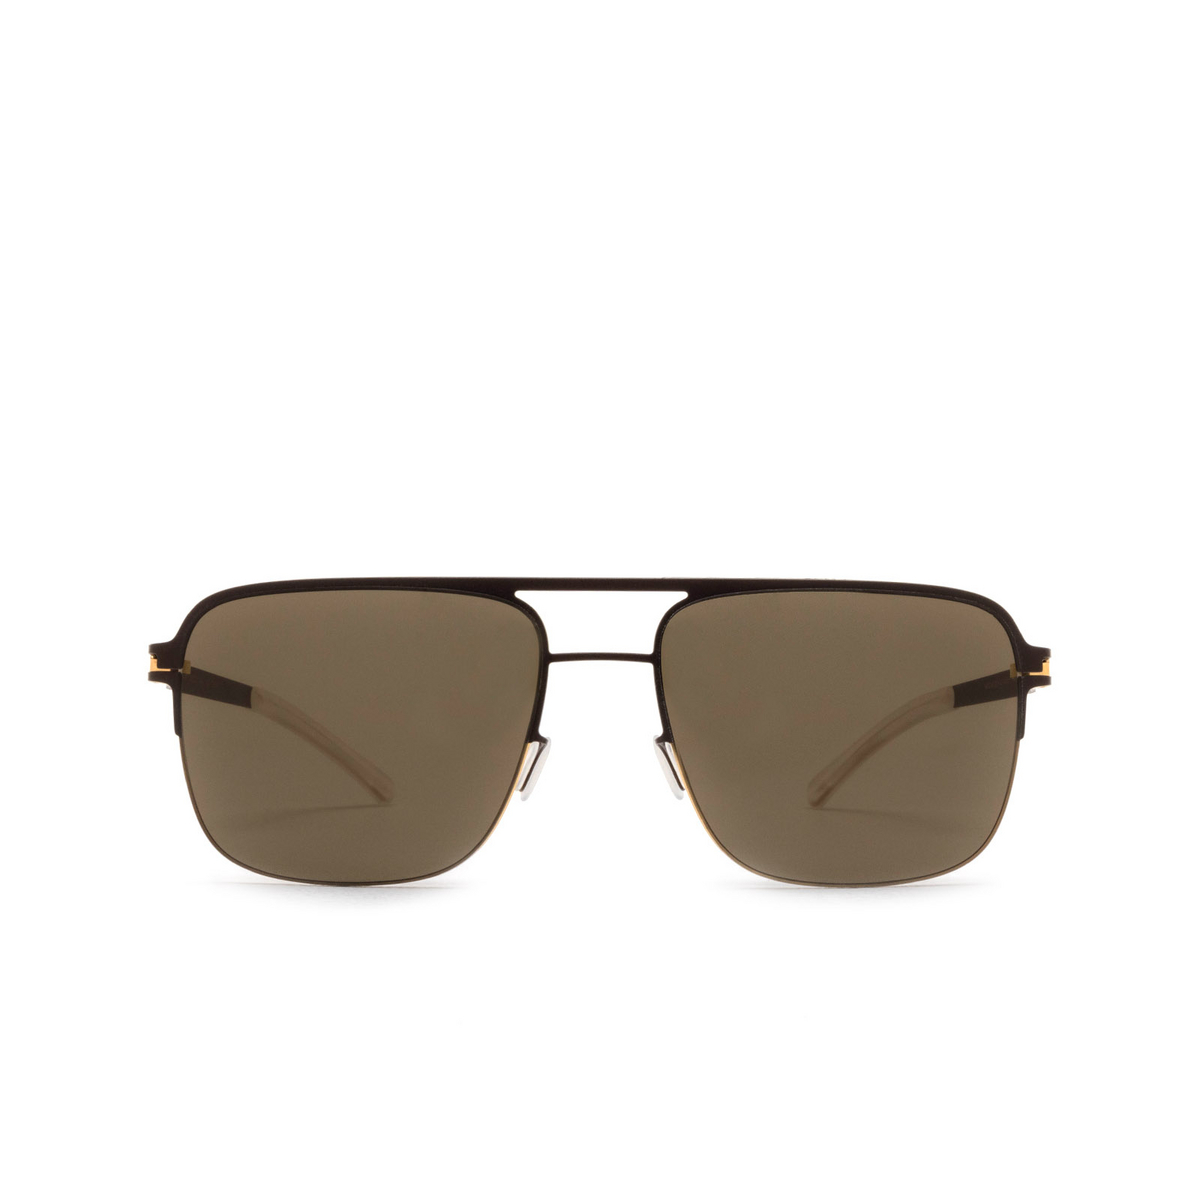 Mykita® Square Sunglasses: Colby color 122 Gold/dark Brown - front view